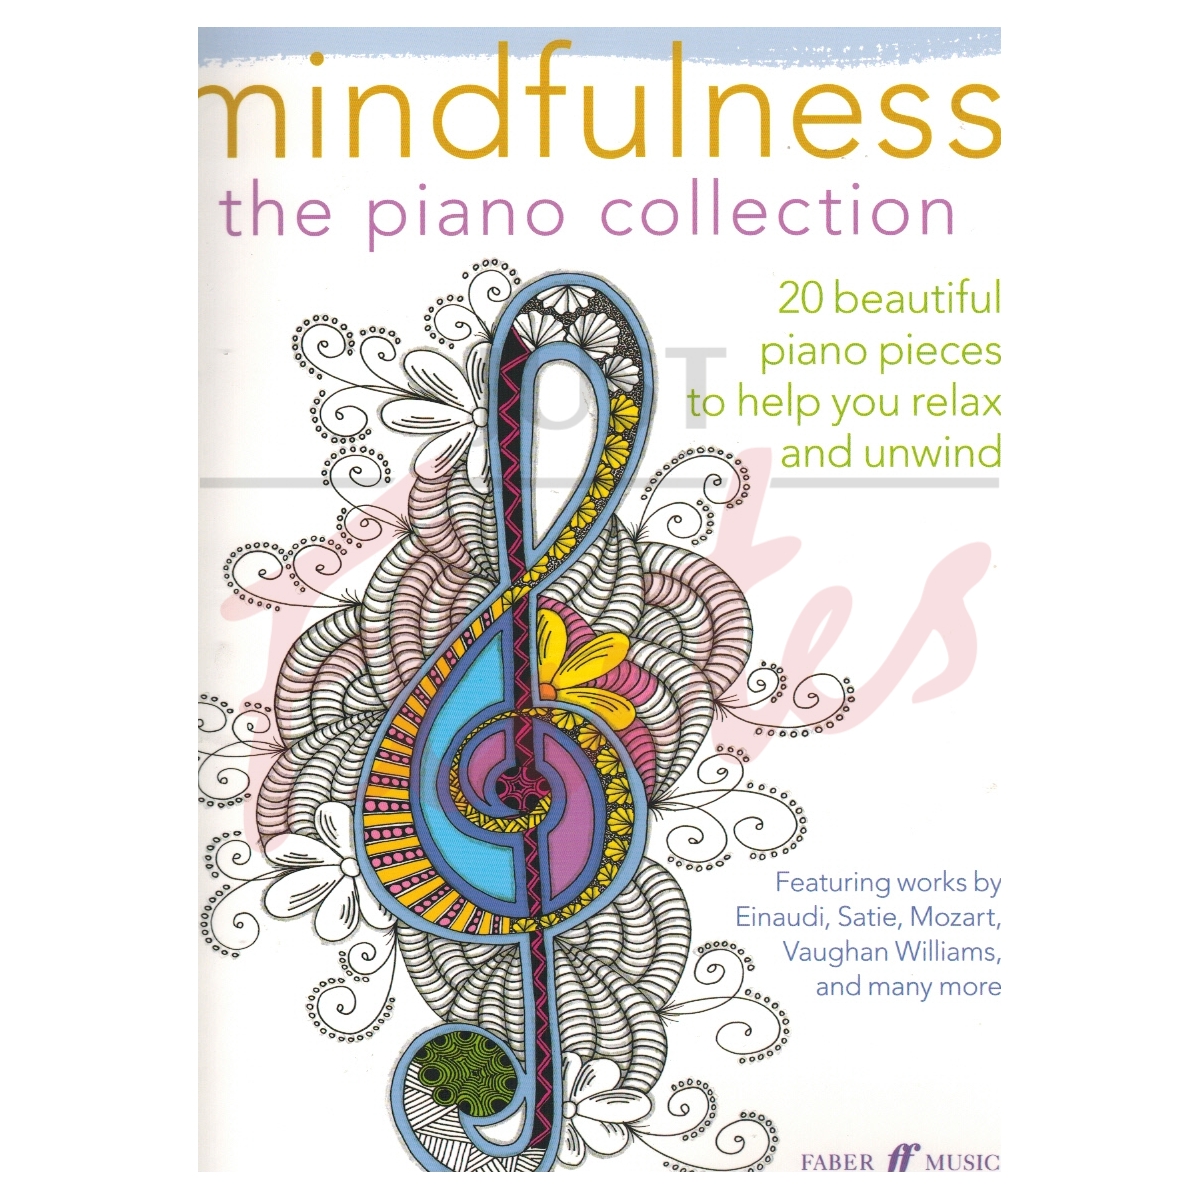 Mindfulness - The Piano Collection